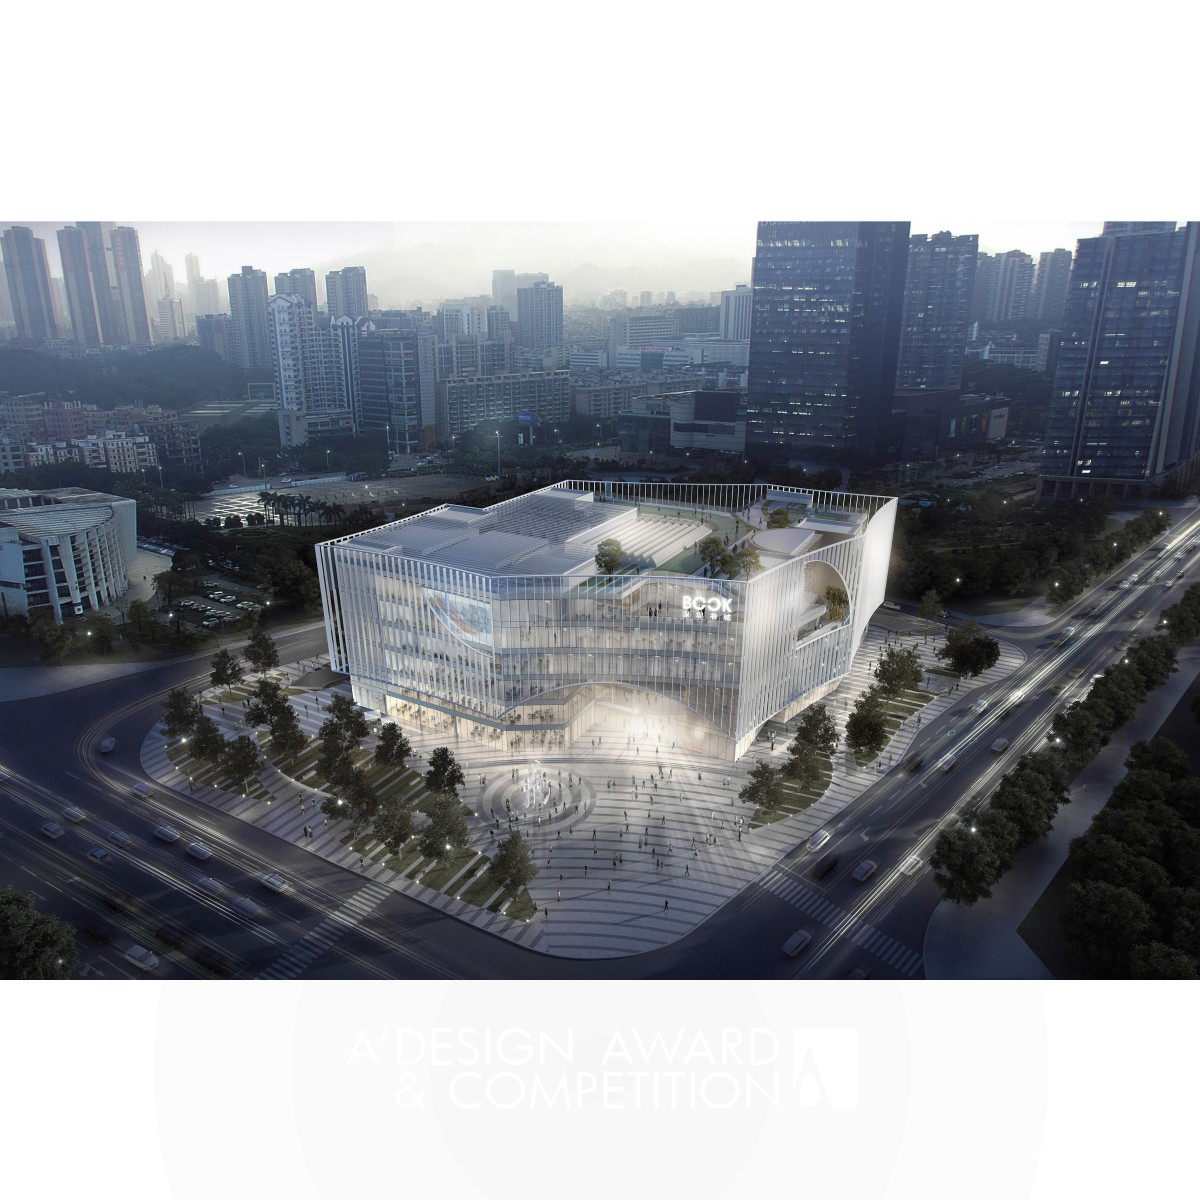 Shenzhen Book City Cultural space and library by Atelier Global Limited